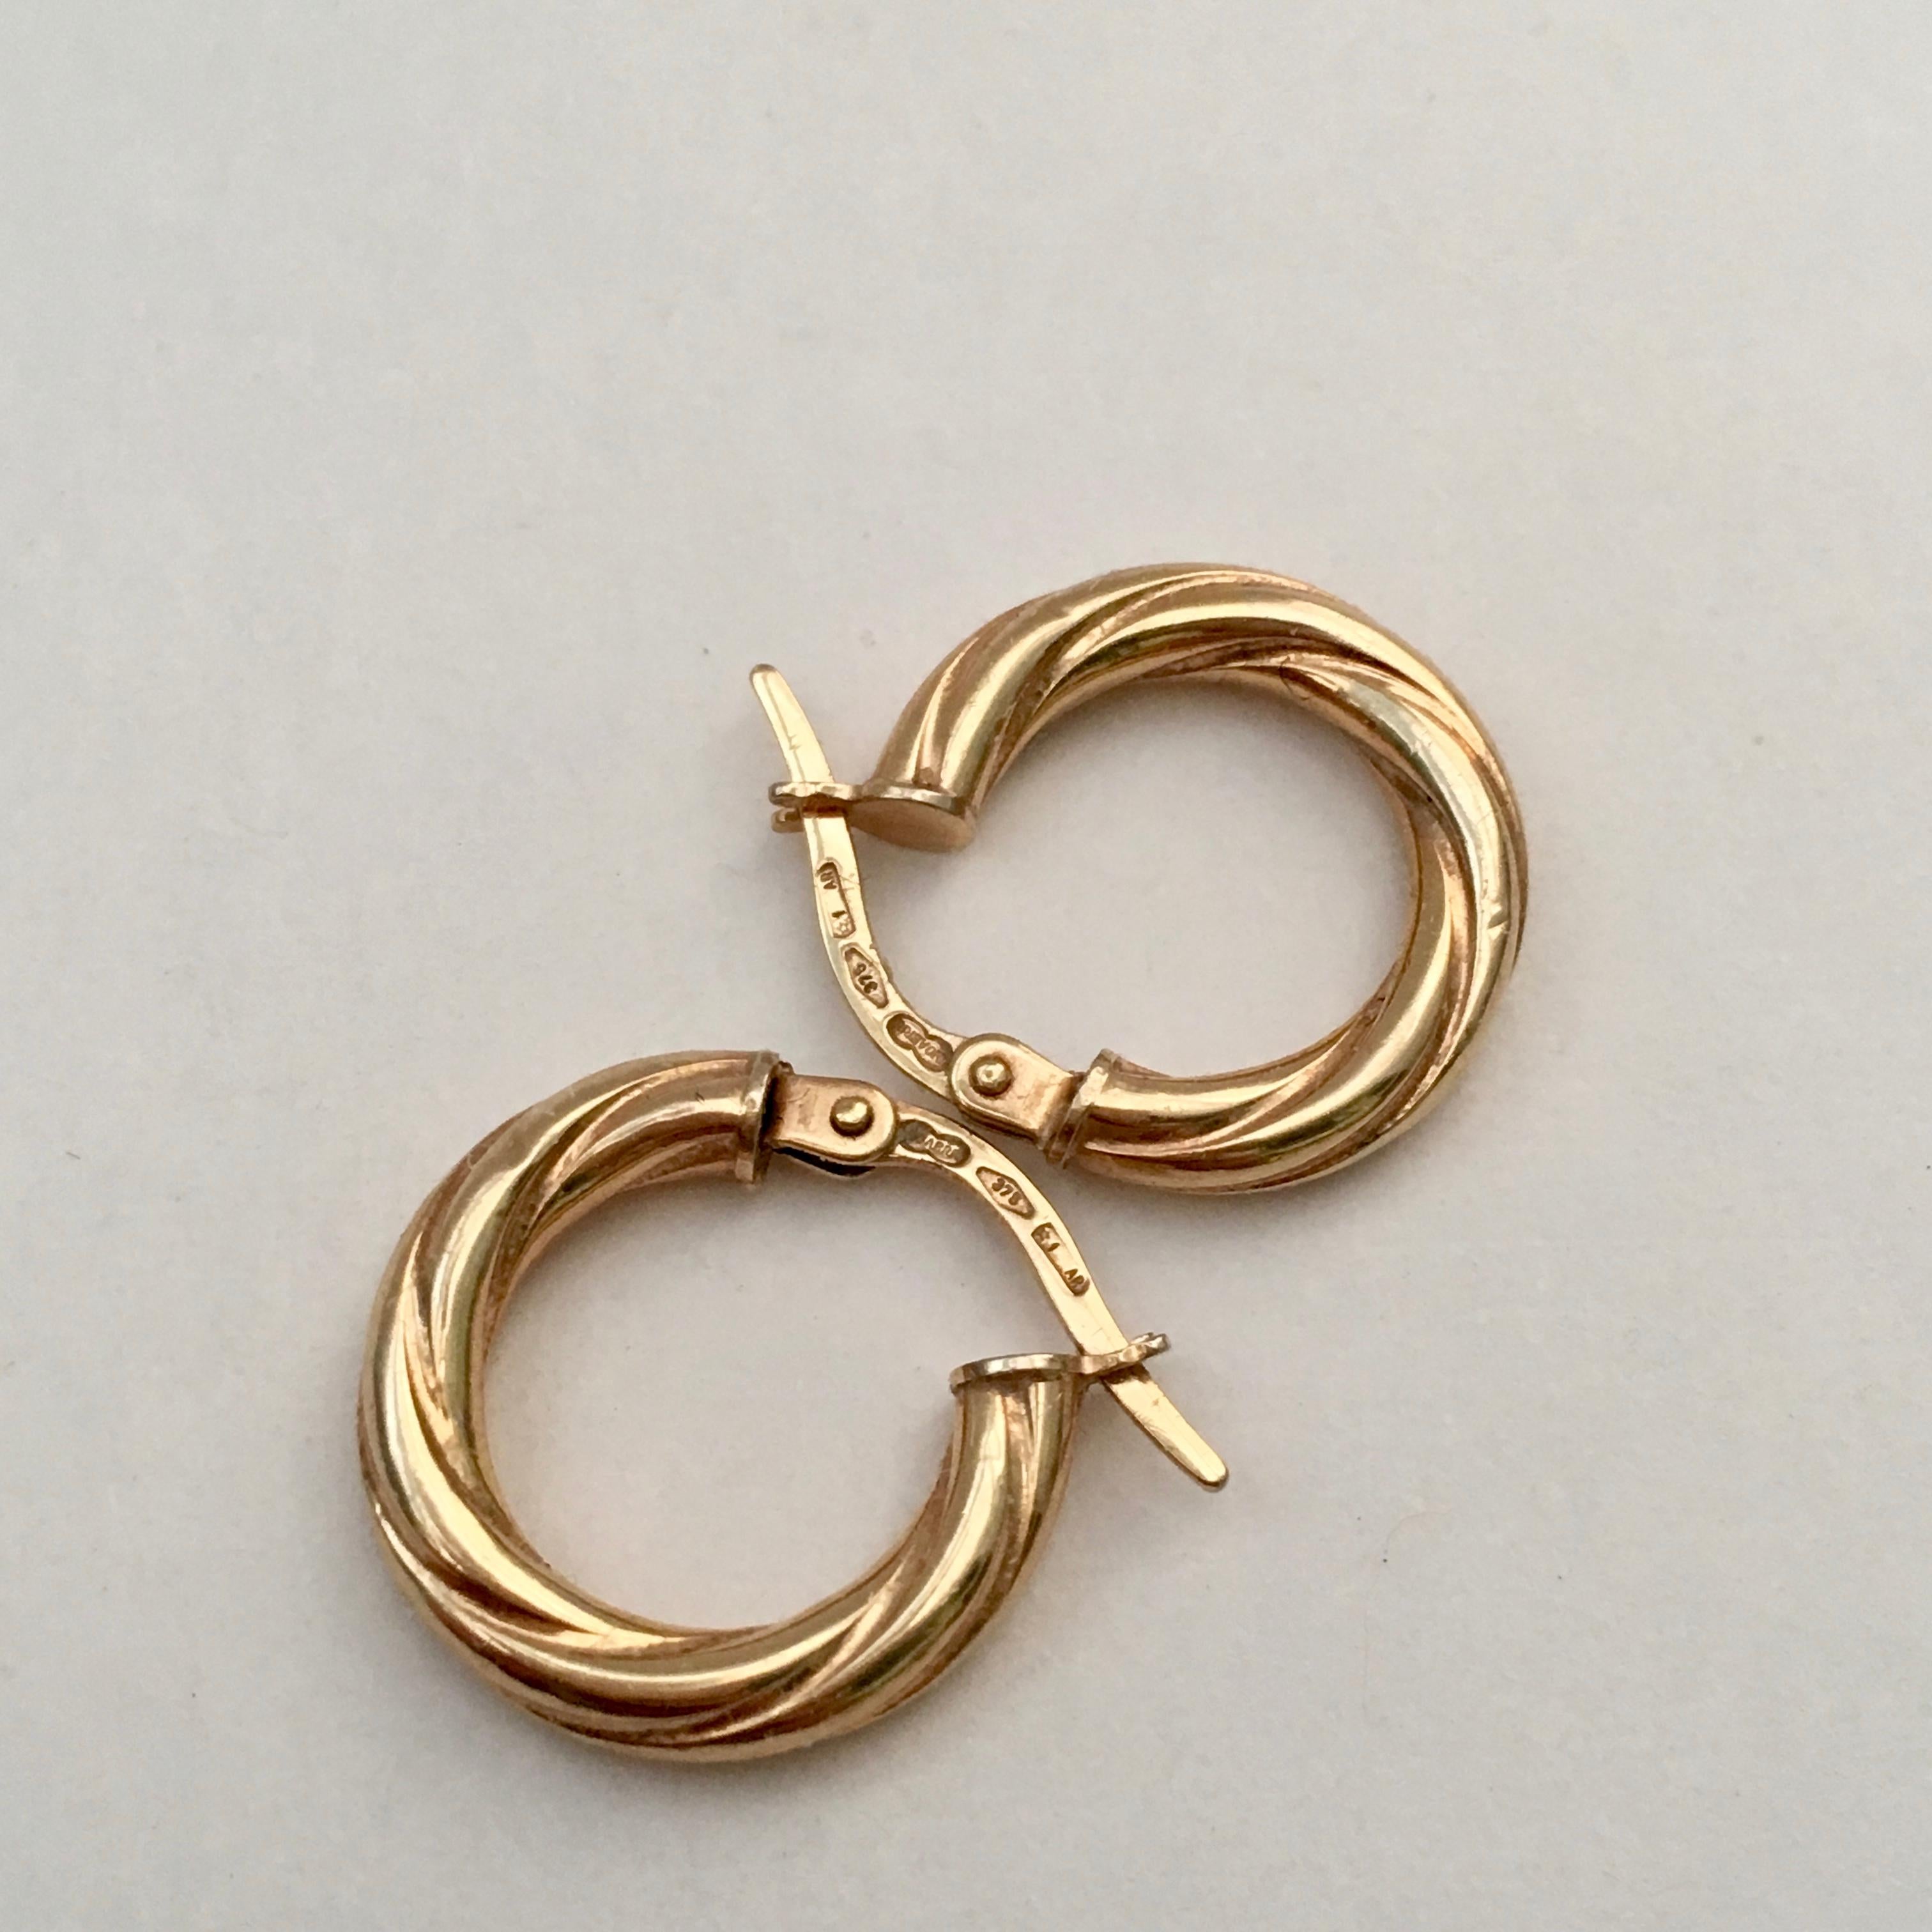 Vintage Gold Hoops Small Twisted Braided Hoop Earrings Yellow Gold In Good Condition For Sale In London, GB